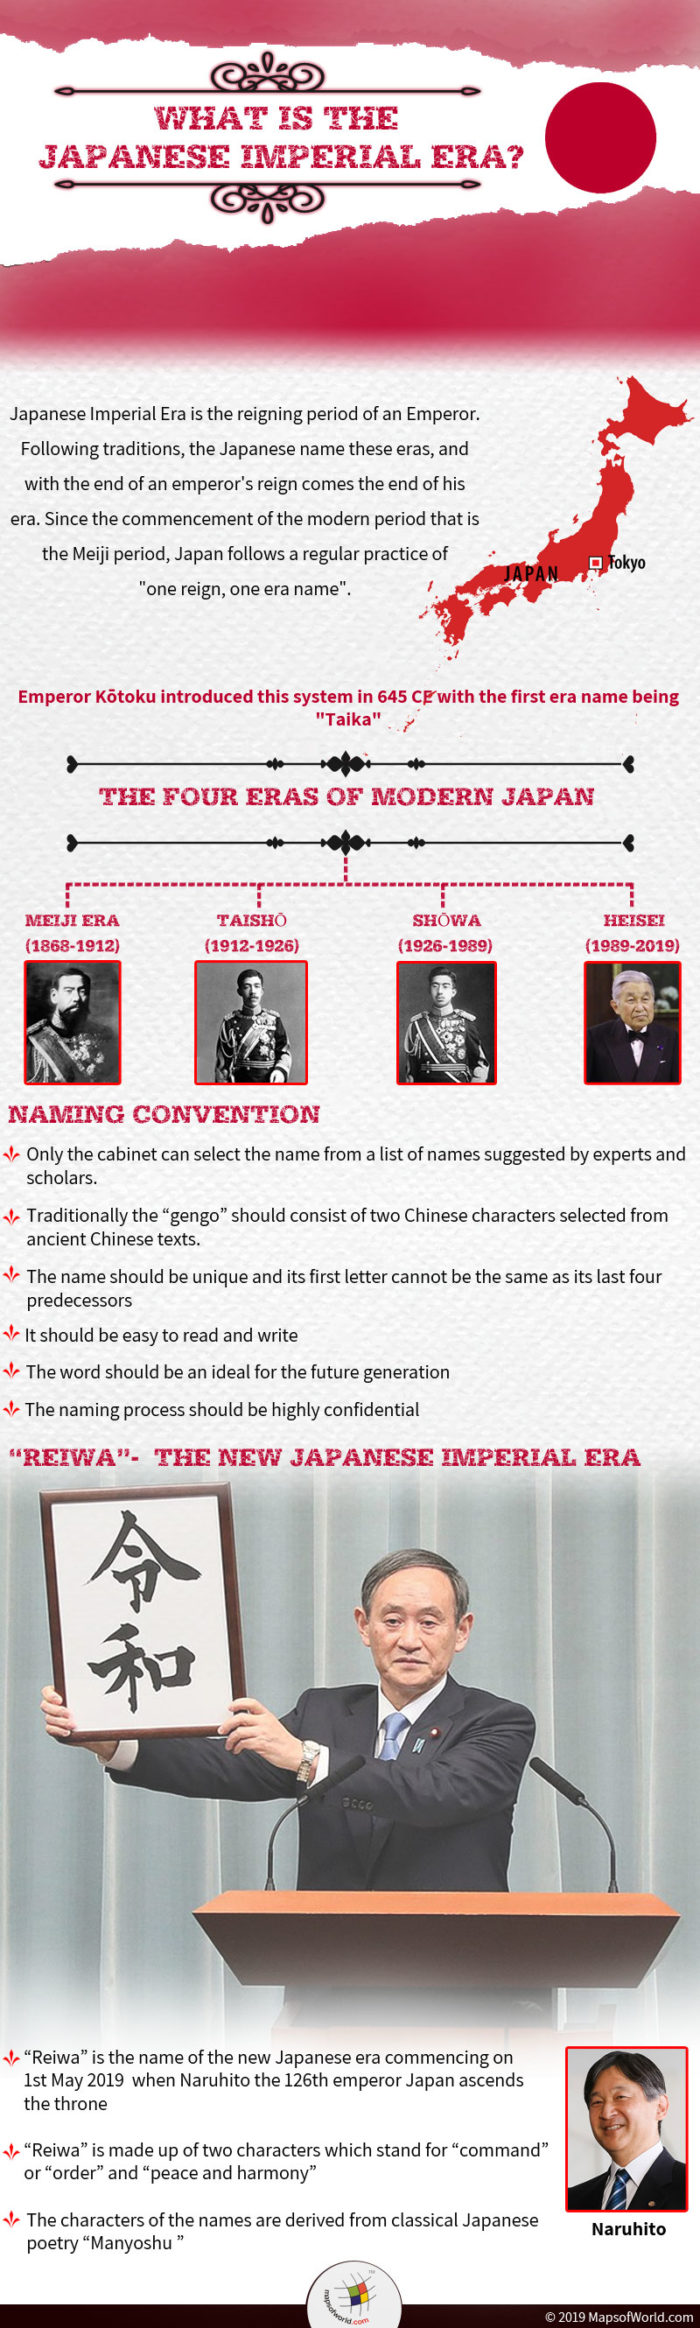 Japanese Imperial Era - The Reigning Period of an Emperor